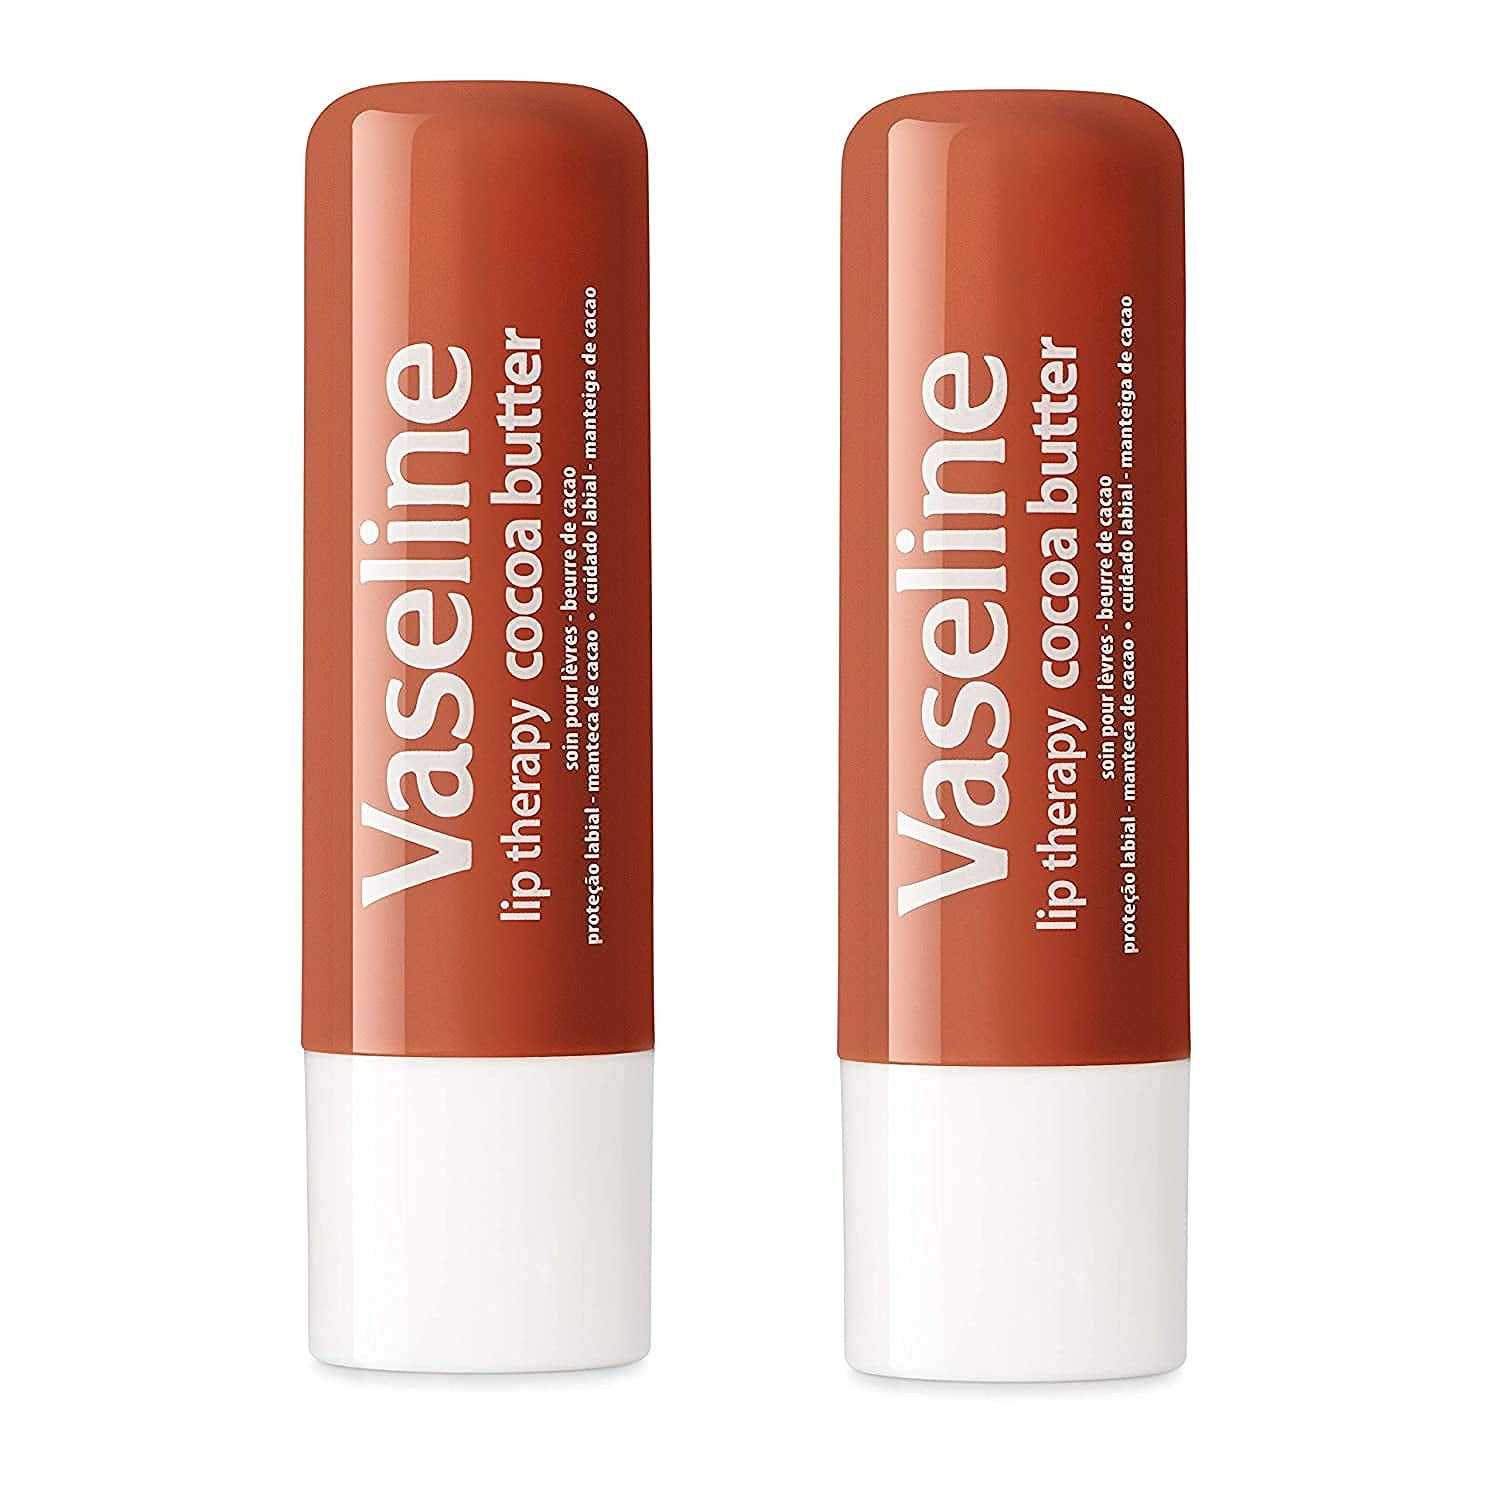 sagsøger torsdag jorden Vaseline Lip Therapy Lip Balm with Petroleum Jelly, Moisture for Chapped  Lips, Cocoa Butter Lip Balm Stick for Hydrating Dry, Peeled & Cracked Lips  (2 Pack) - Walmart.com